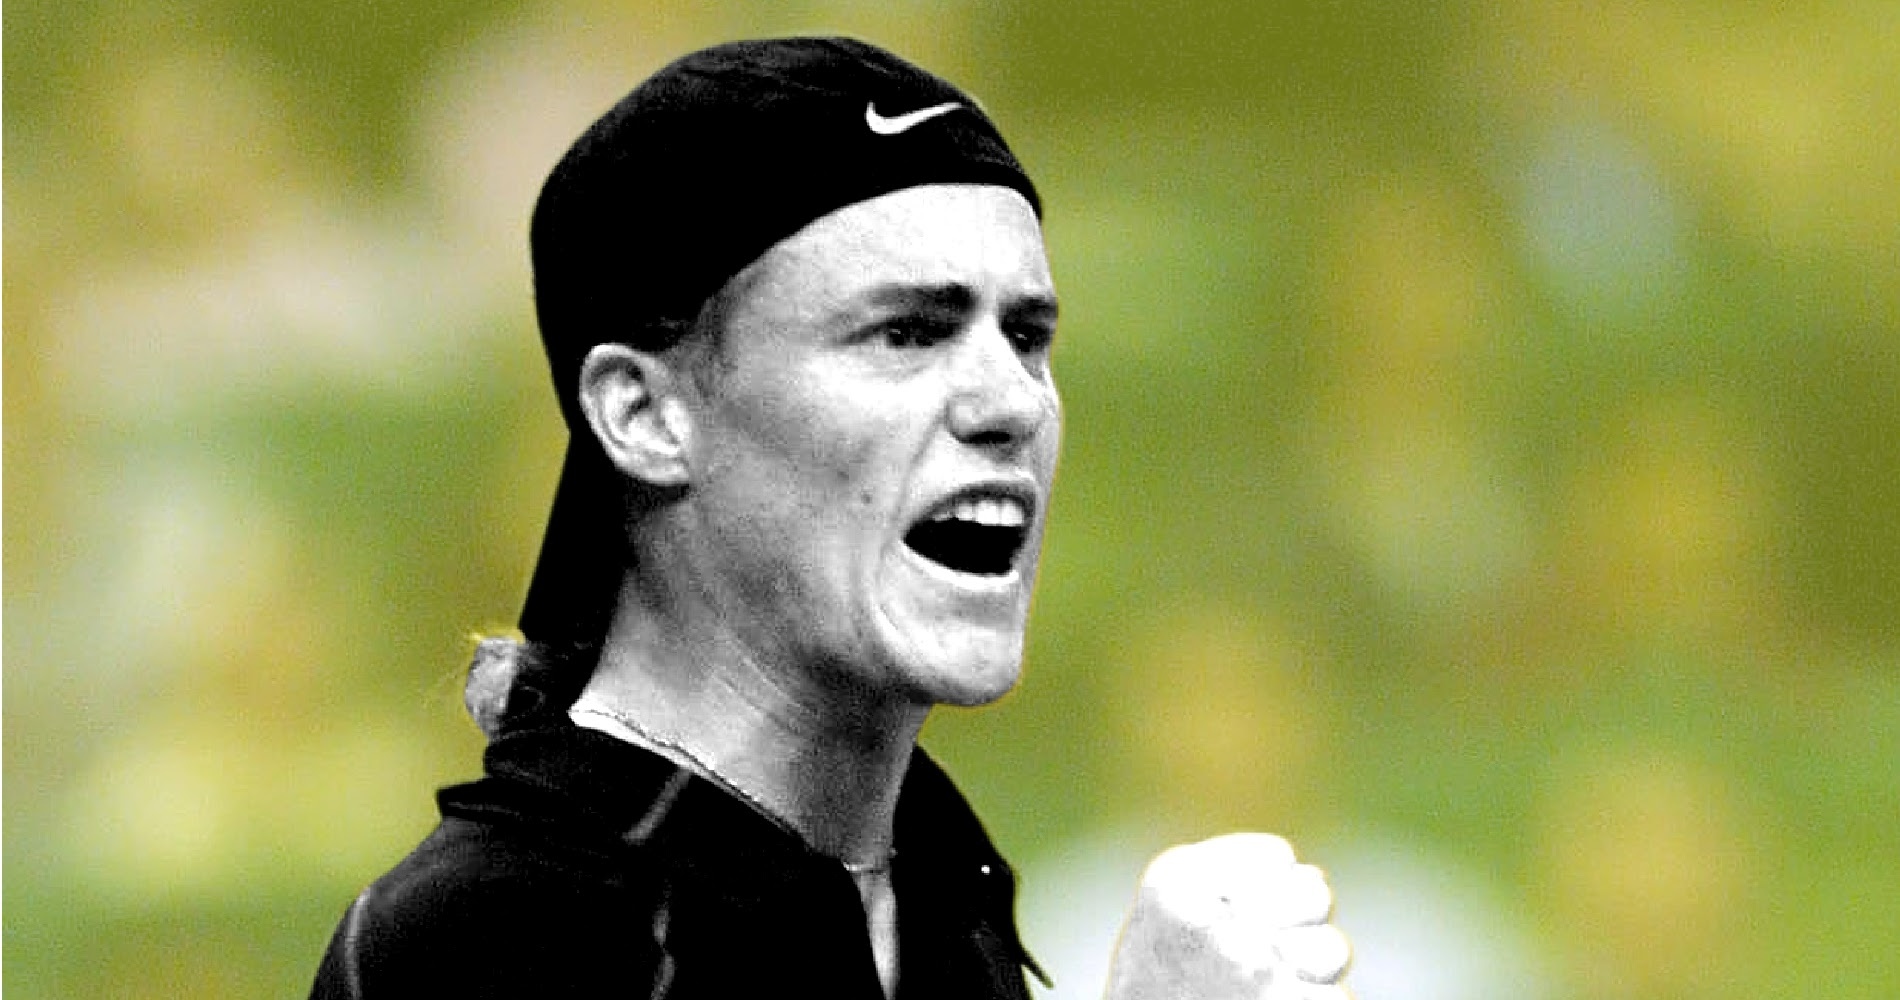 Lleyton Hewitt, On this day 11.01.2021